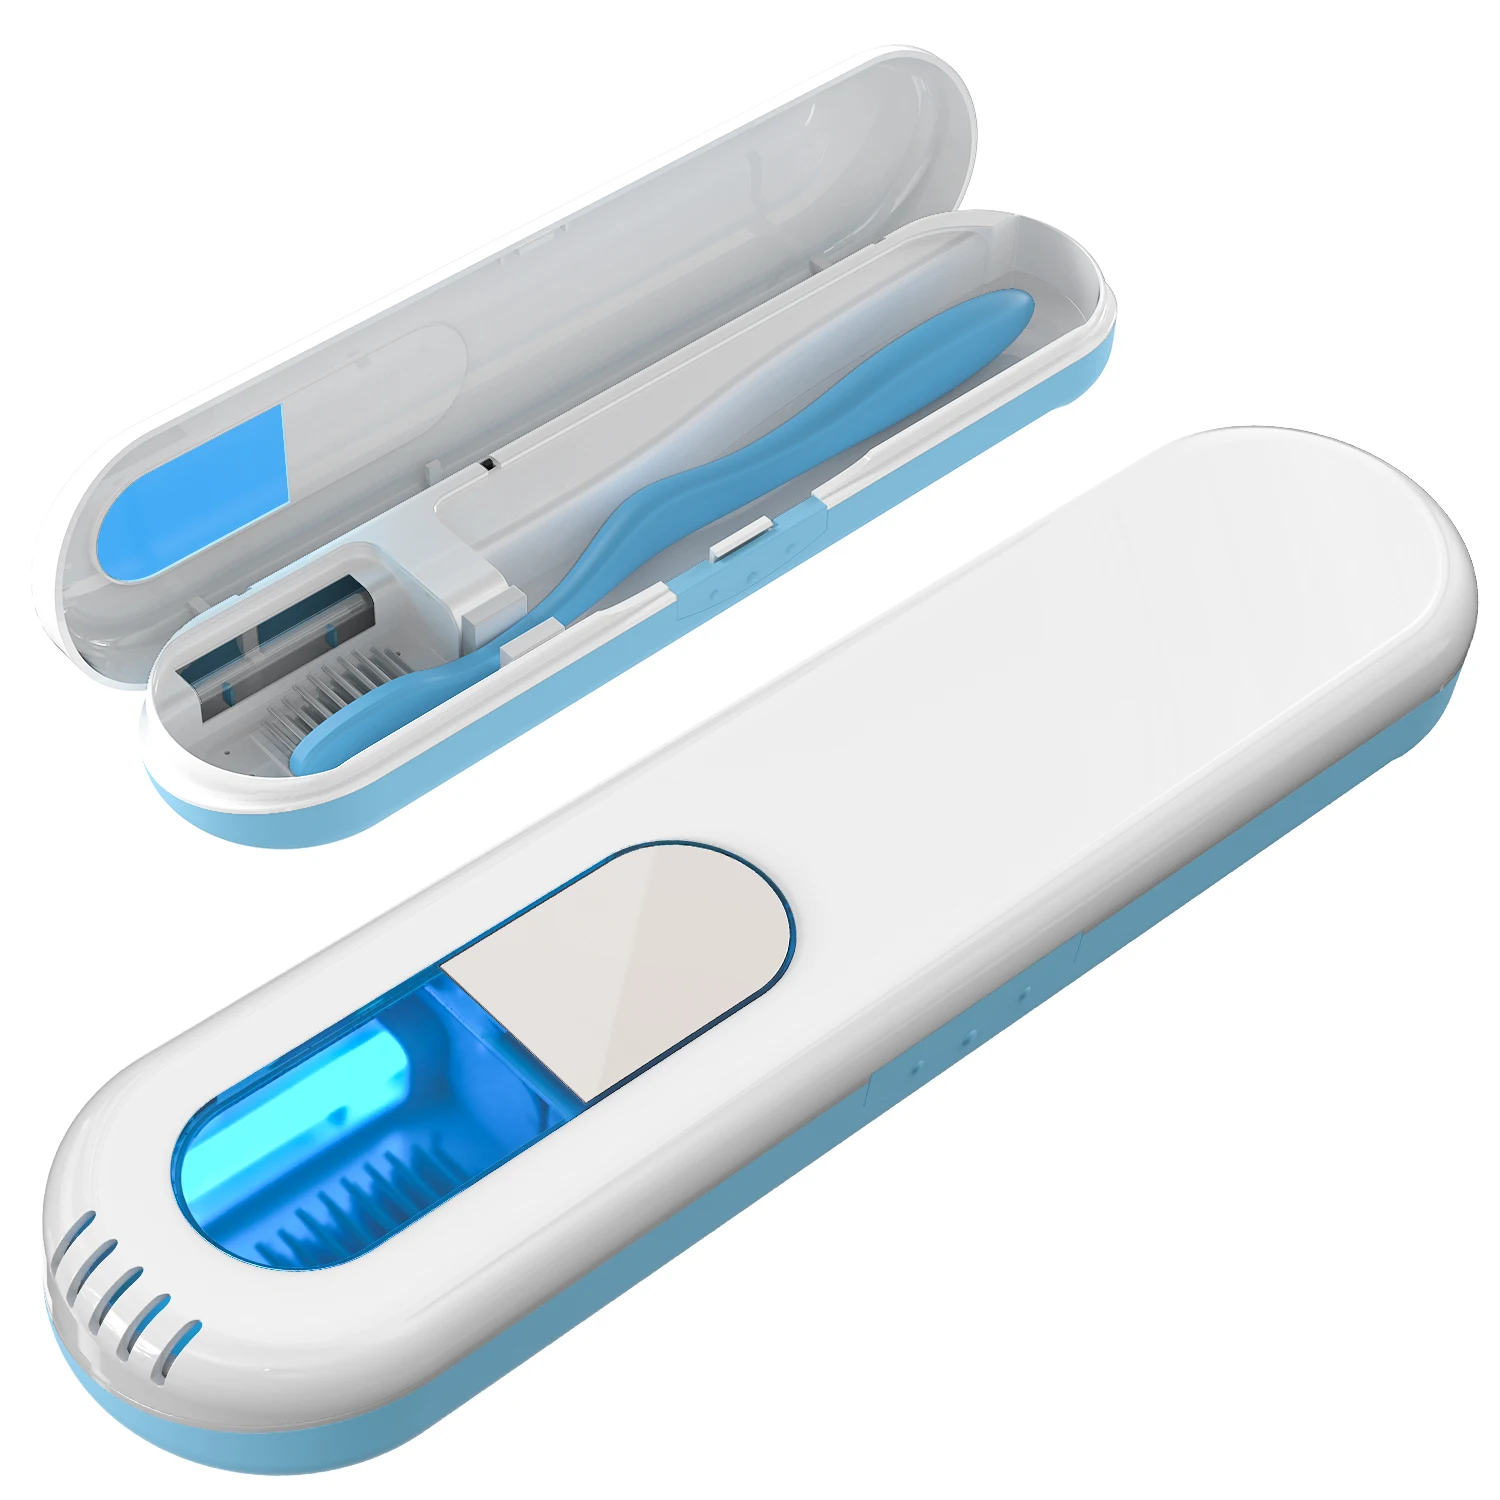 

Portable Antibacteria UV Light Toothbrush Sterilizer Box Tooth Brushes Disinfection Sanitizer Battery Powered Oral Hygiene Tools